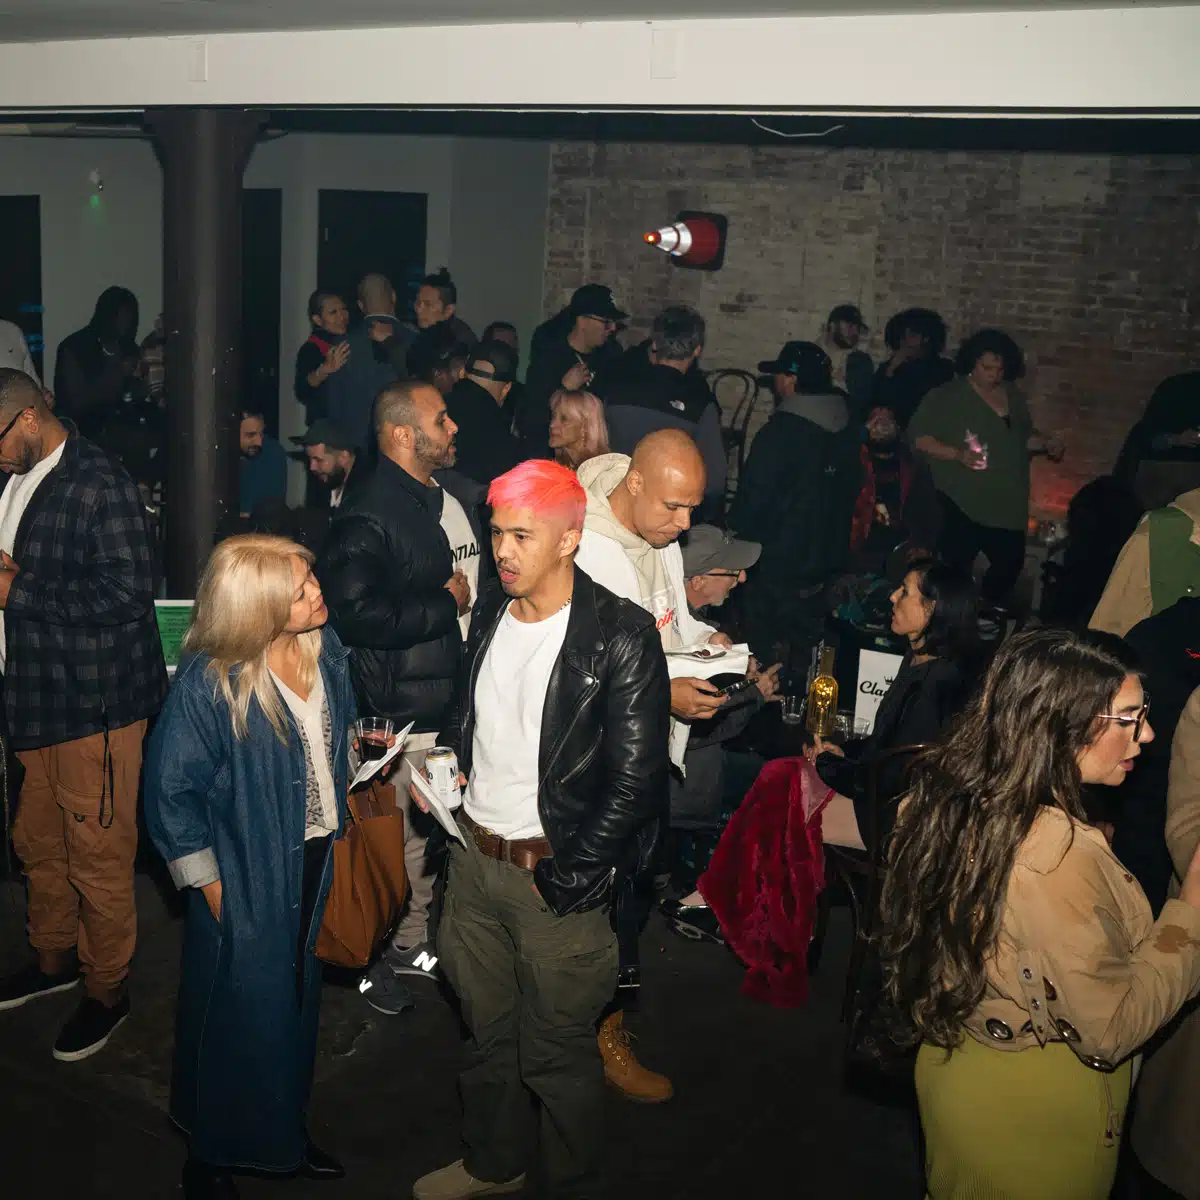 Private Event Space NYC: Weedubest Werx and Adsomo.Co welcome you - please enjoy responsibly